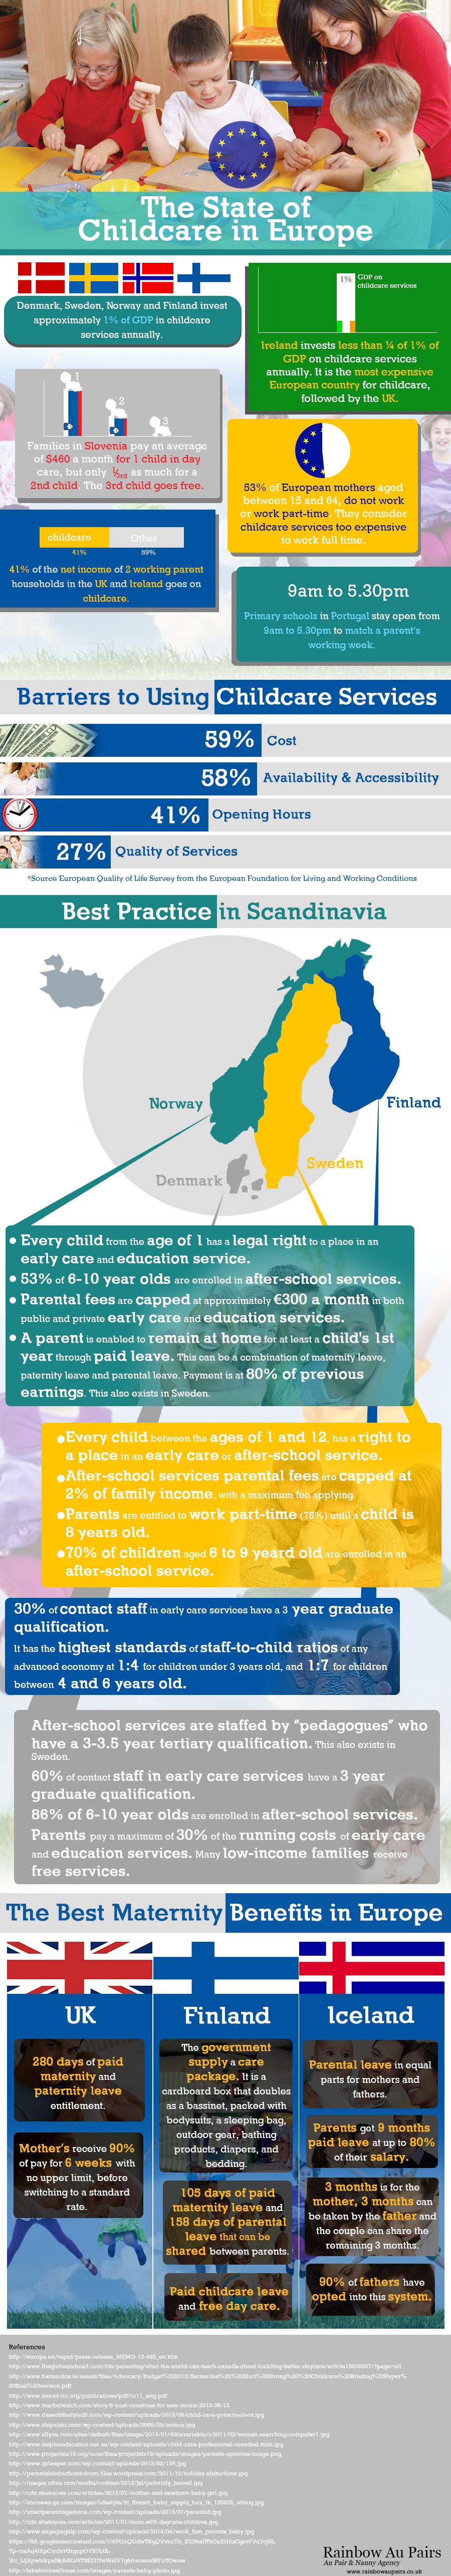 The State of Childcare in Europe